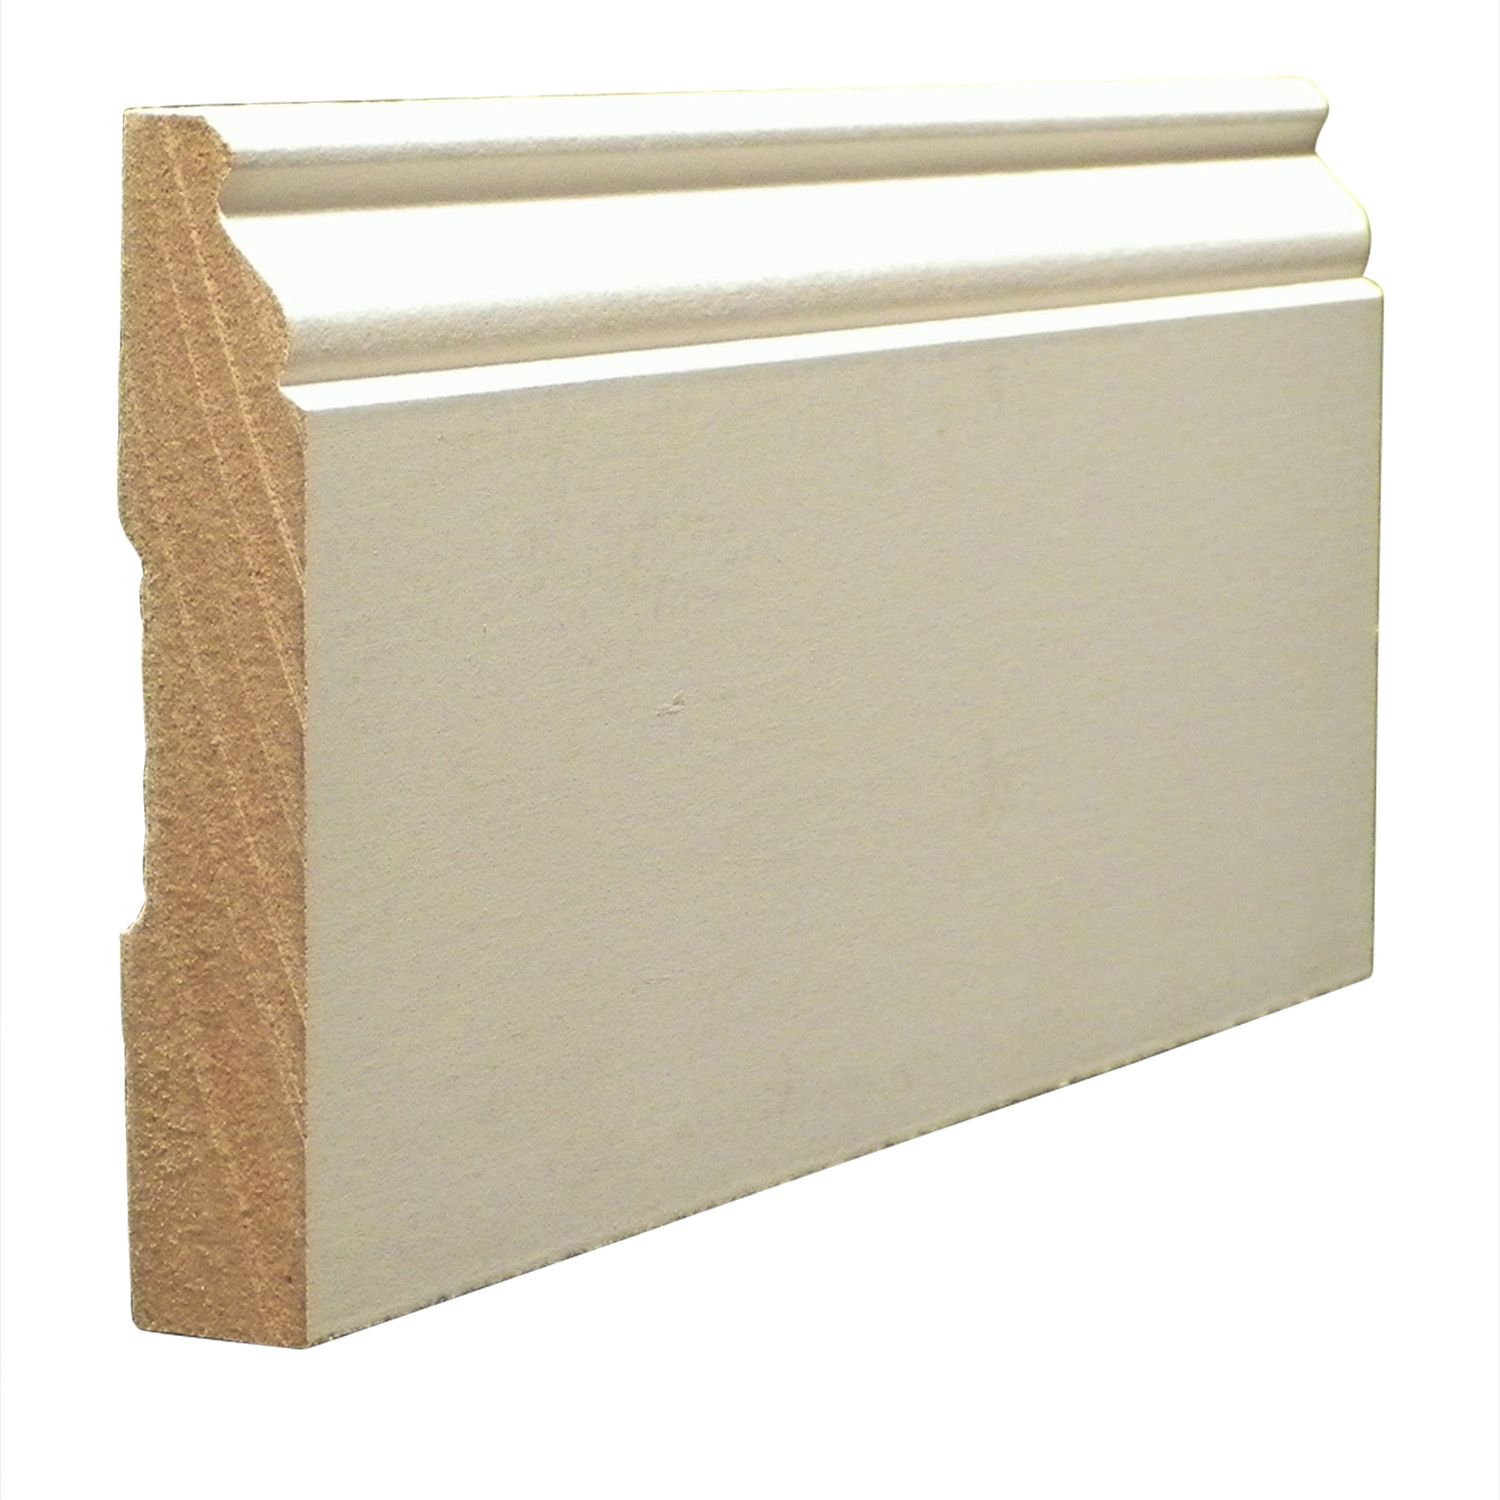 12mm MDF Architrave Australian Colonial MR Primed 5.4m (price per lineal metre)